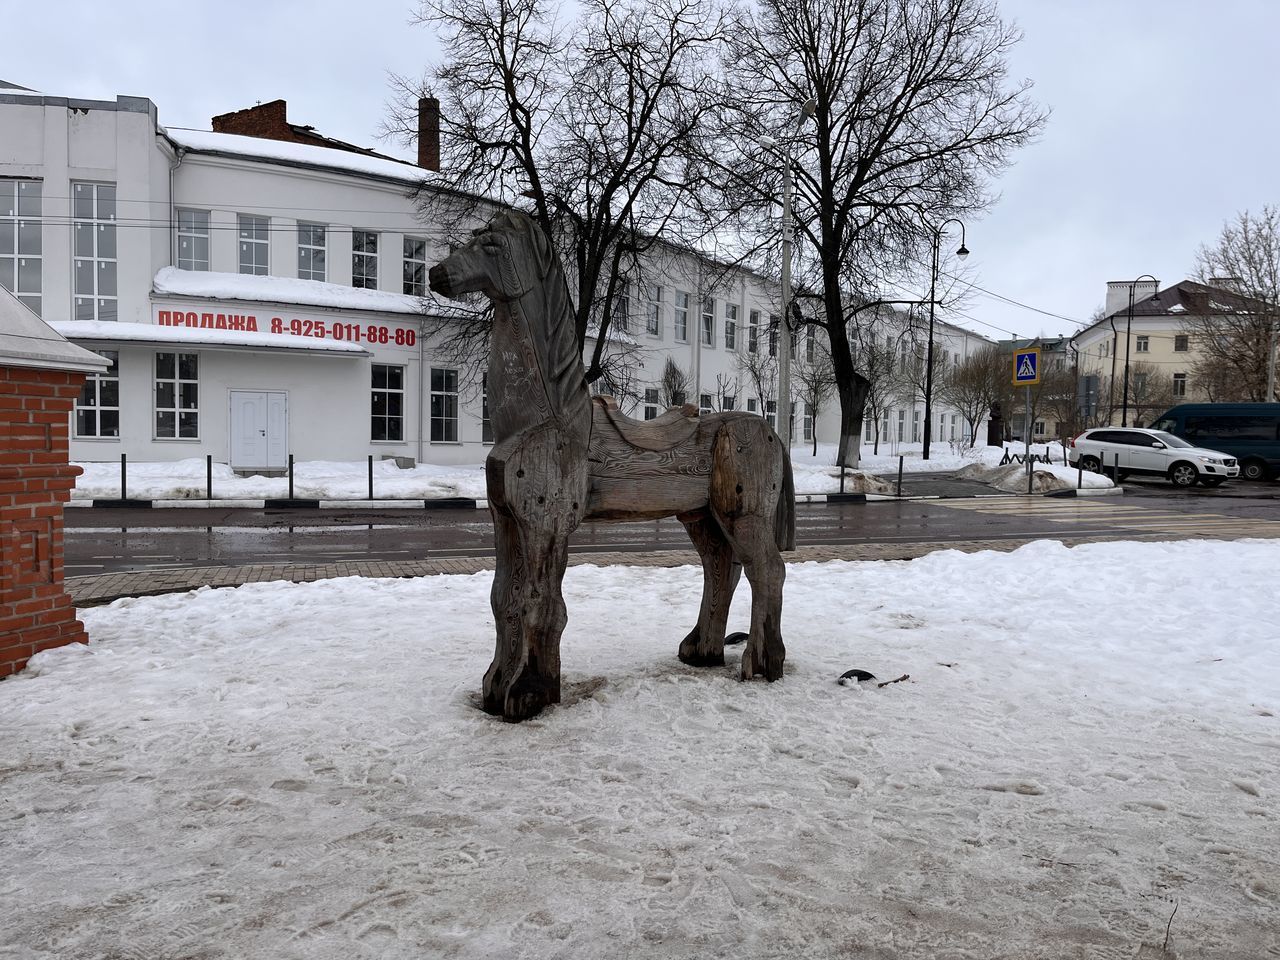 winter, snow, architecture, building exterior, built structure, city, cold temperature, tree, building, nature, sky, bare tree, mammal, animal, street, no people, sculpture, animal themes, urban area, house, statue, residential district, day, domestic animals, art, horse, vehicle, outdoors, transportation, plant, car